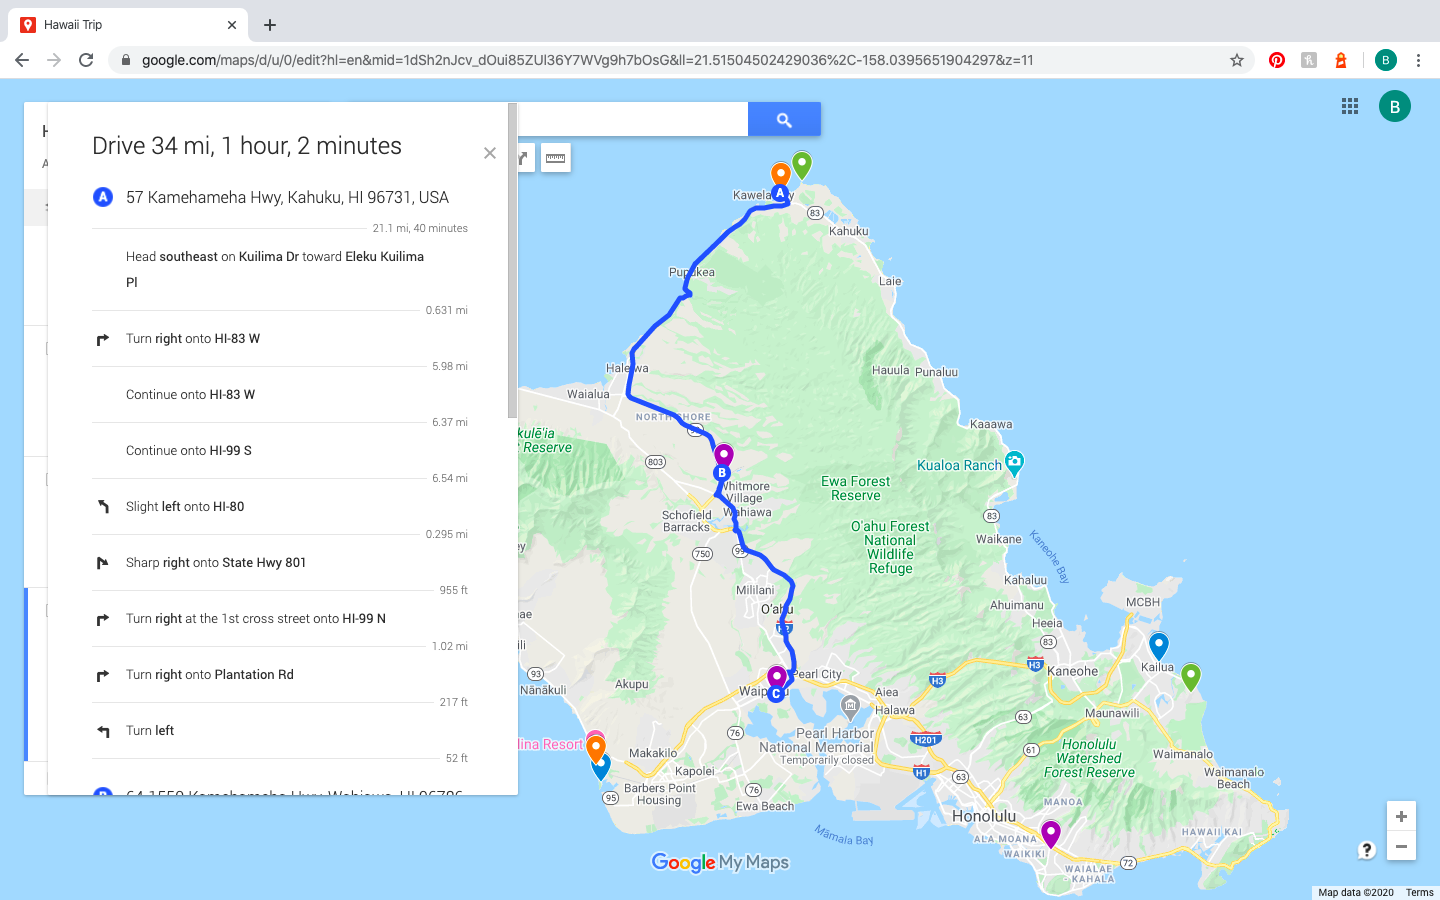 directions on Google Maps